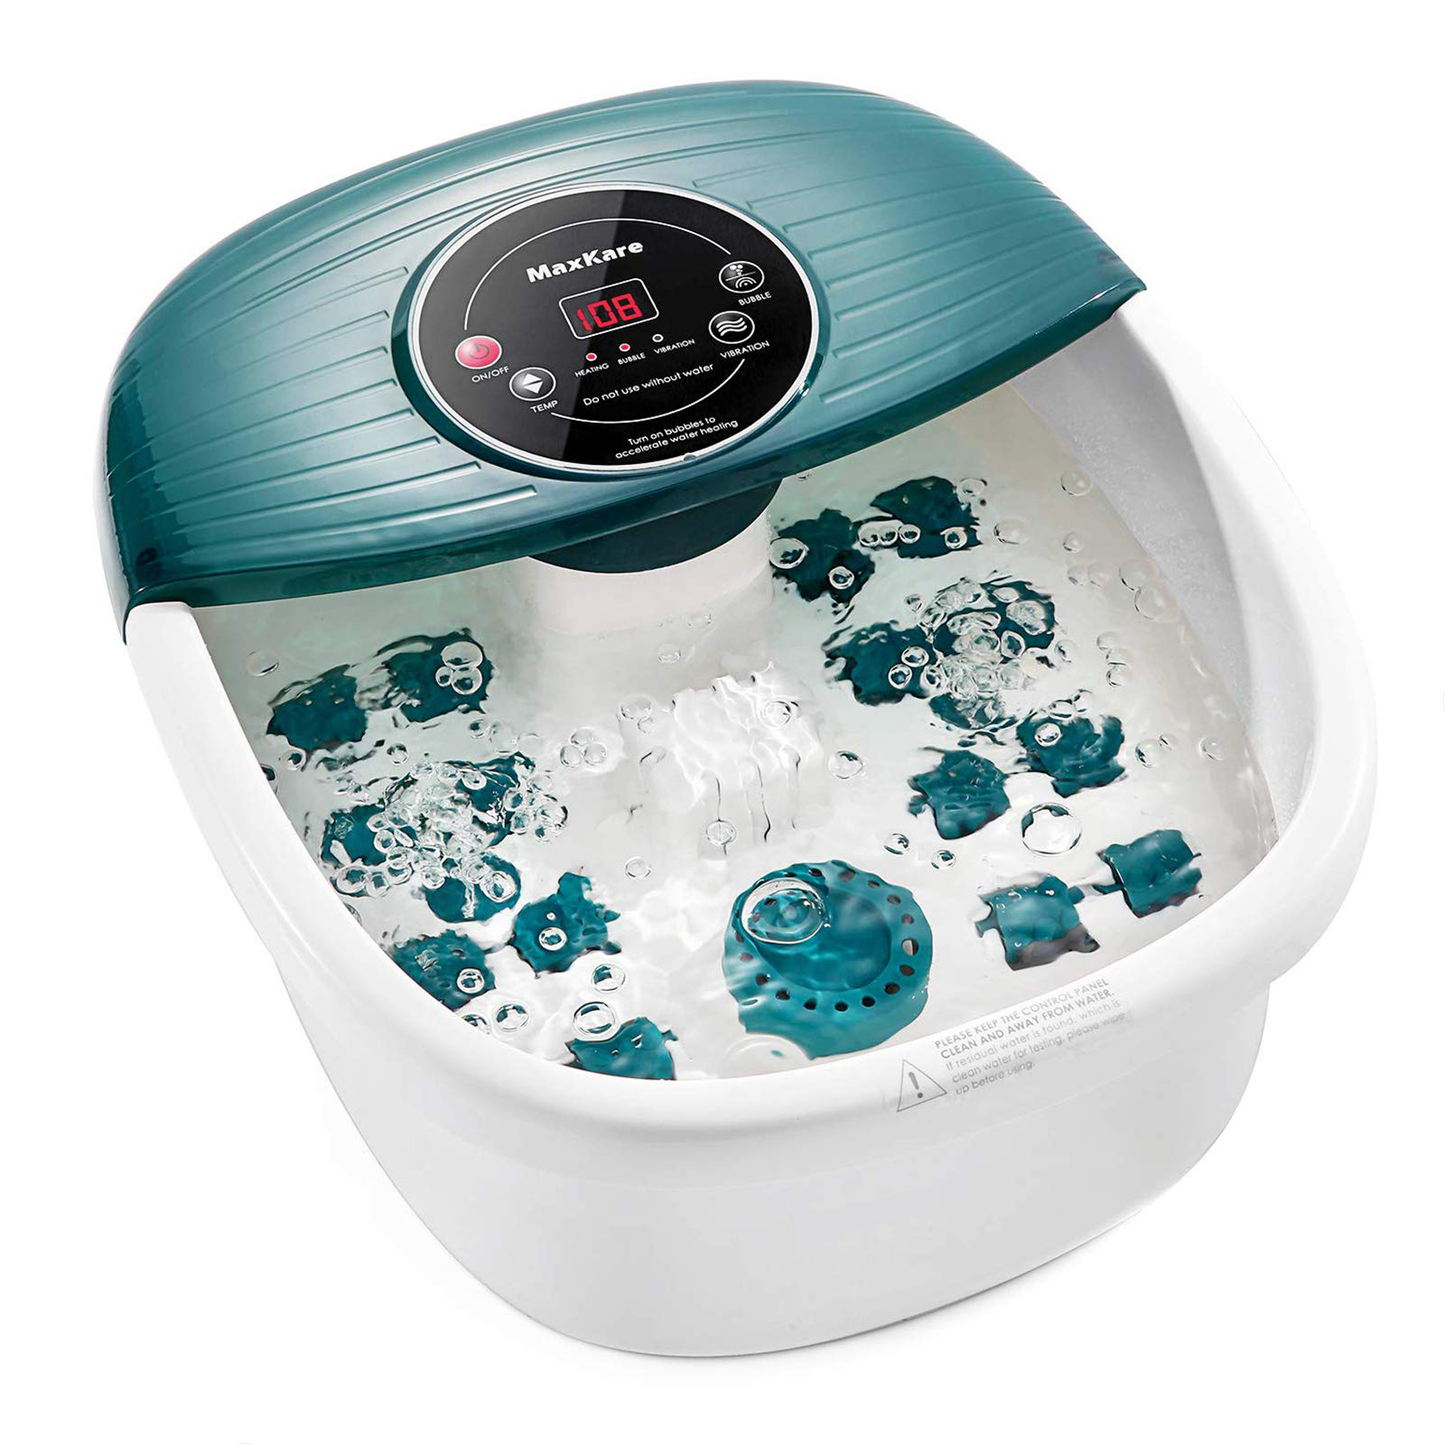 Foot Spa Bath Massager with Heat, Bubbles, and Vibration, Digital Temperature Control, 16 Massage Rollers with Mini Detachable Massage Points